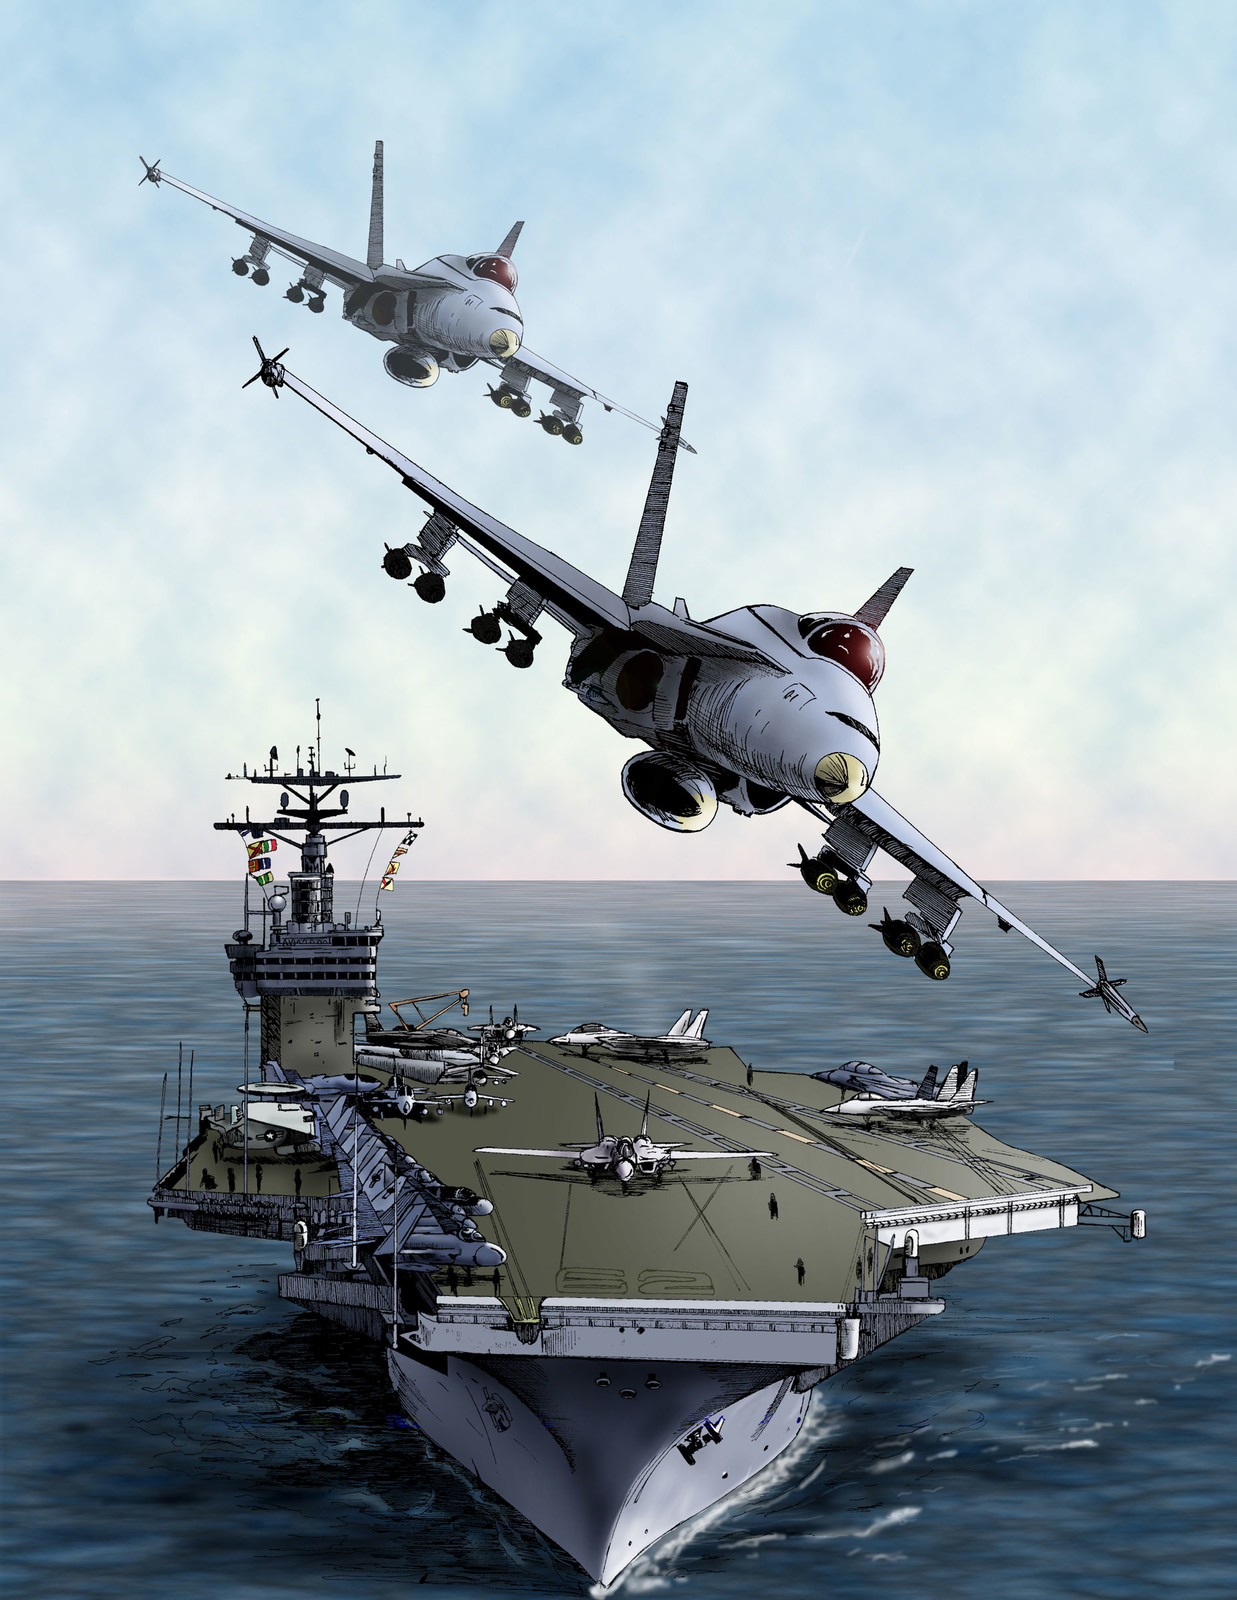 I composited together a drawing I made of an F-18 and an aircraft carrier, colorized in Photoshop, and created the water and sky in Photoshop.